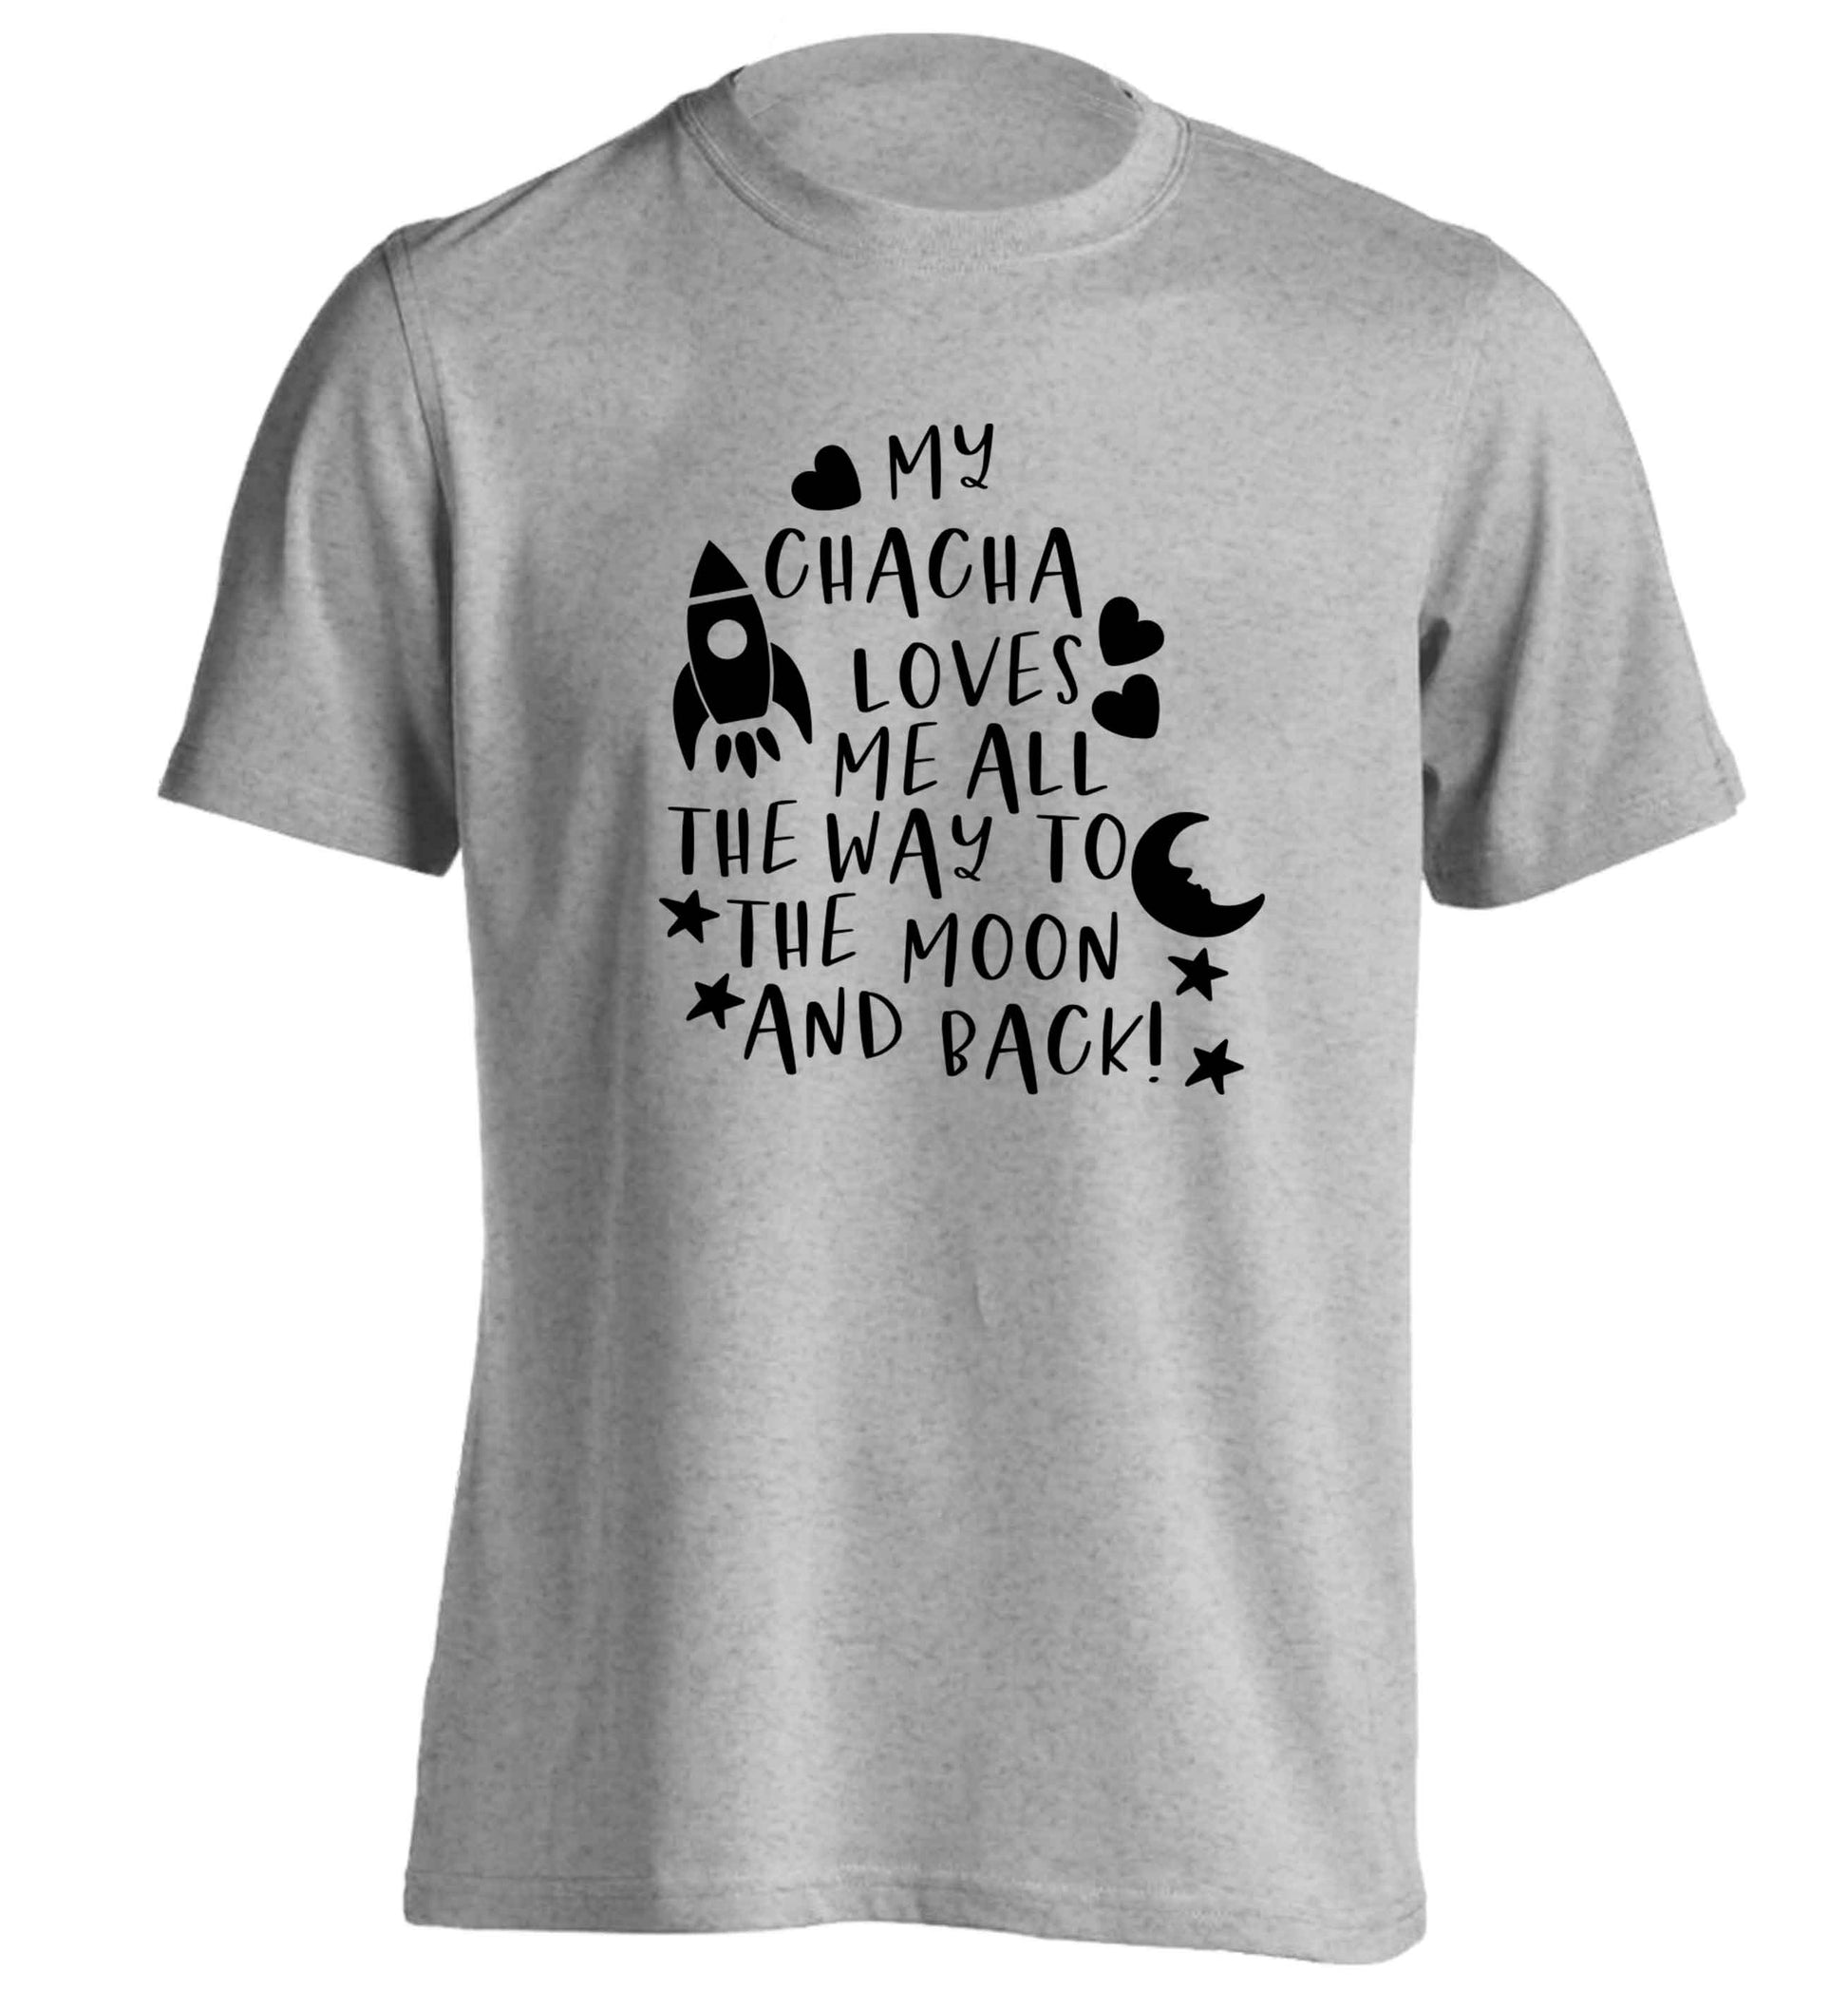 My chacha loves me all the way to the moon and back adults unisex grey Tshirt 2XL